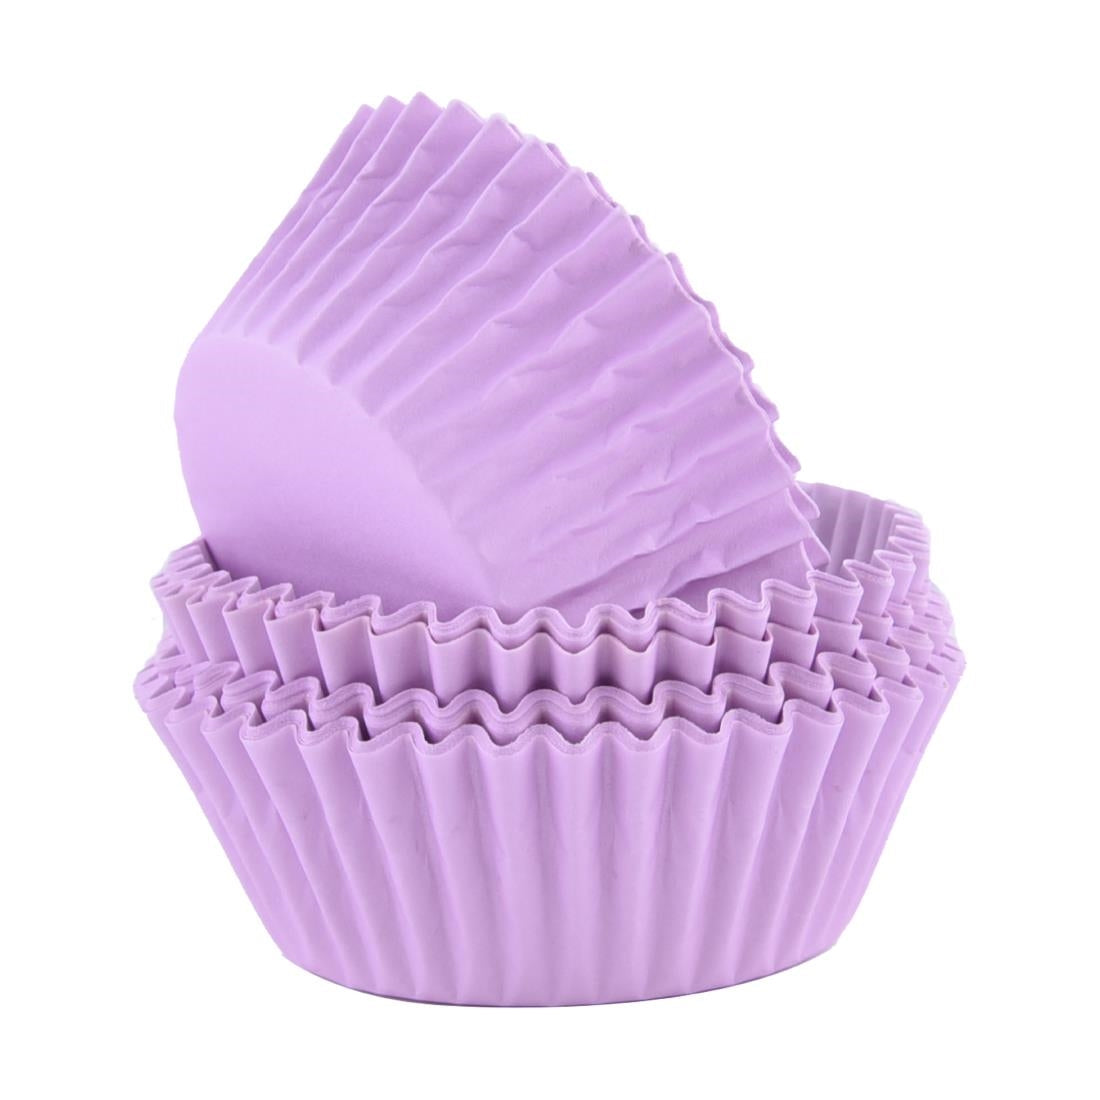 CX142 PME Block Colour Cupcake Cases Purple, Pack of 60 JD Catering Equipment Solutions Ltd